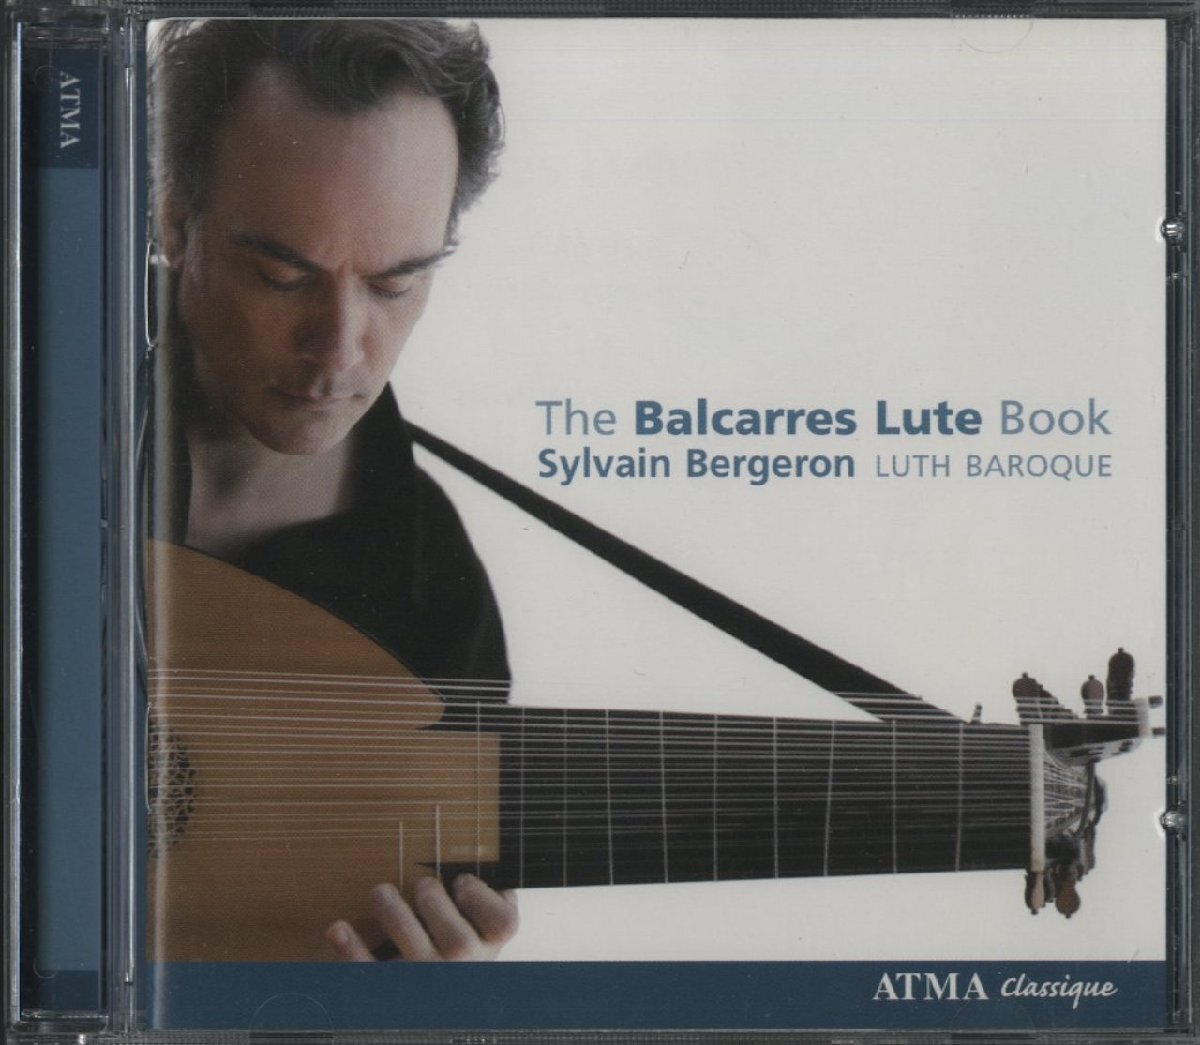 CD/ シルヴァン・バージェロン/ THE BALCARRES LUTE BOOK / 輸入盤 ACD22562 40423_画像1